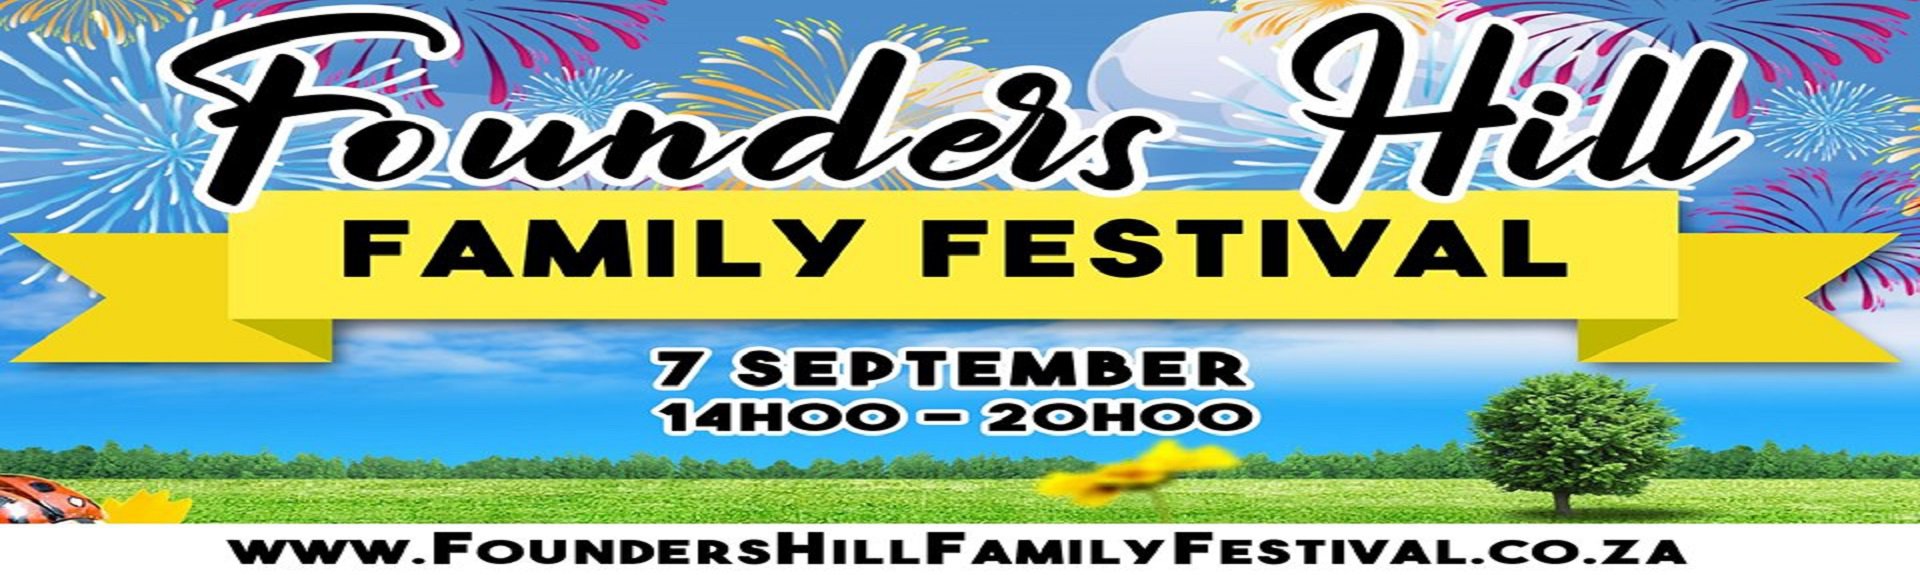 Founders Hill Family Festival & Pyro Spectacular